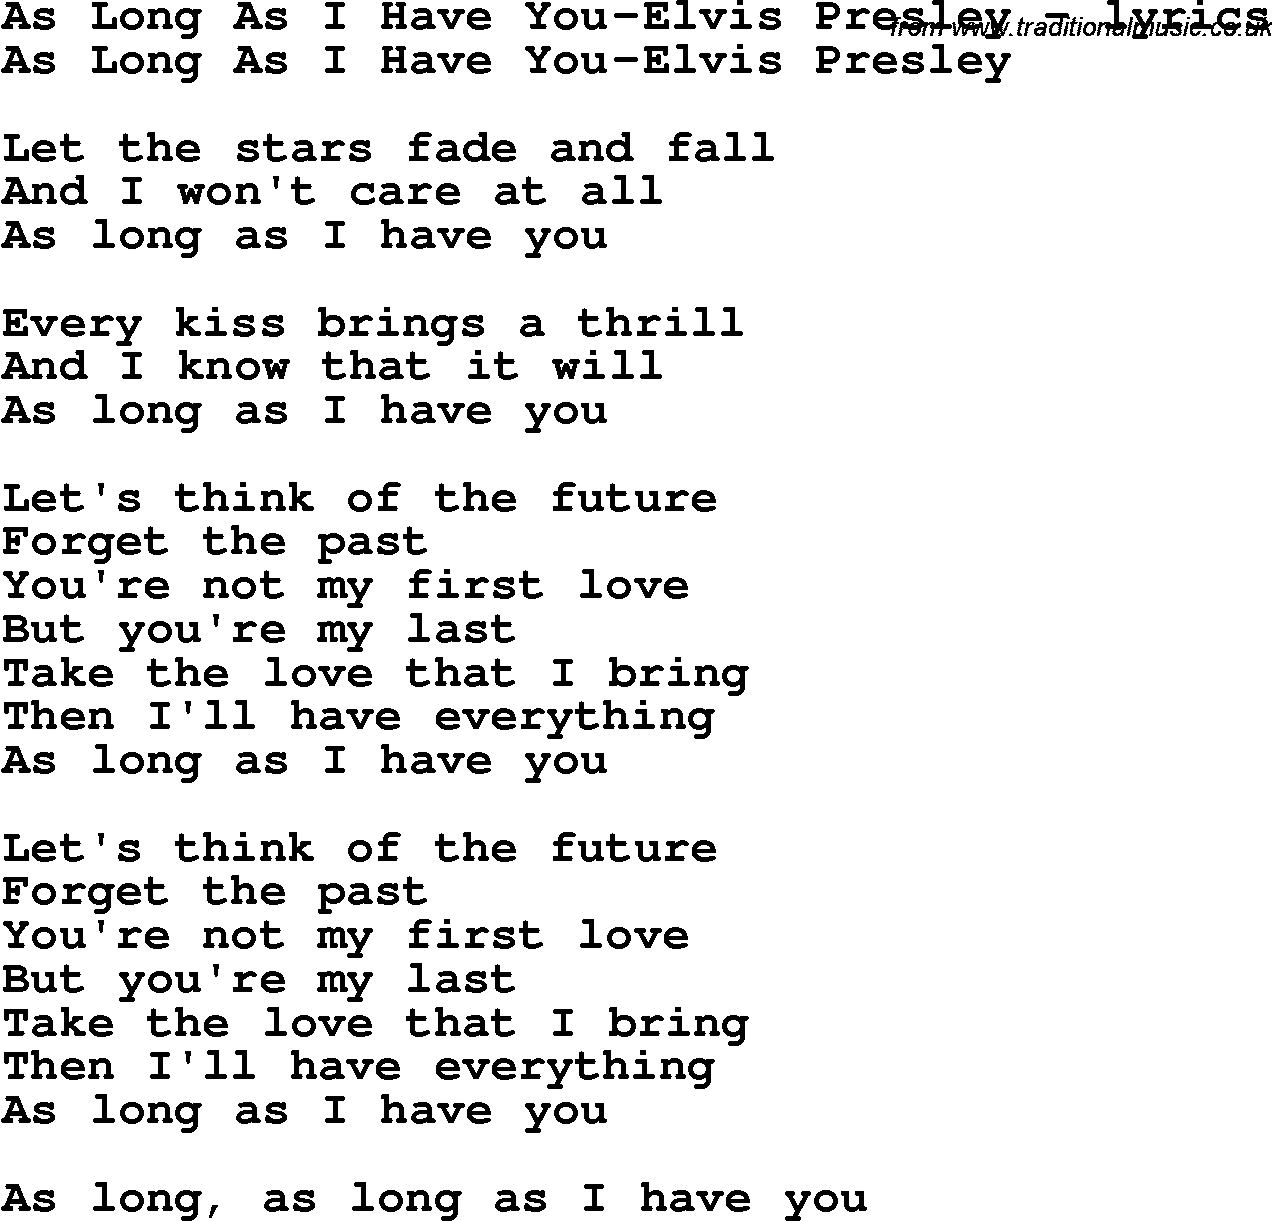 Love Song Lyrics for: As Long As I Have You-Elvis Presley